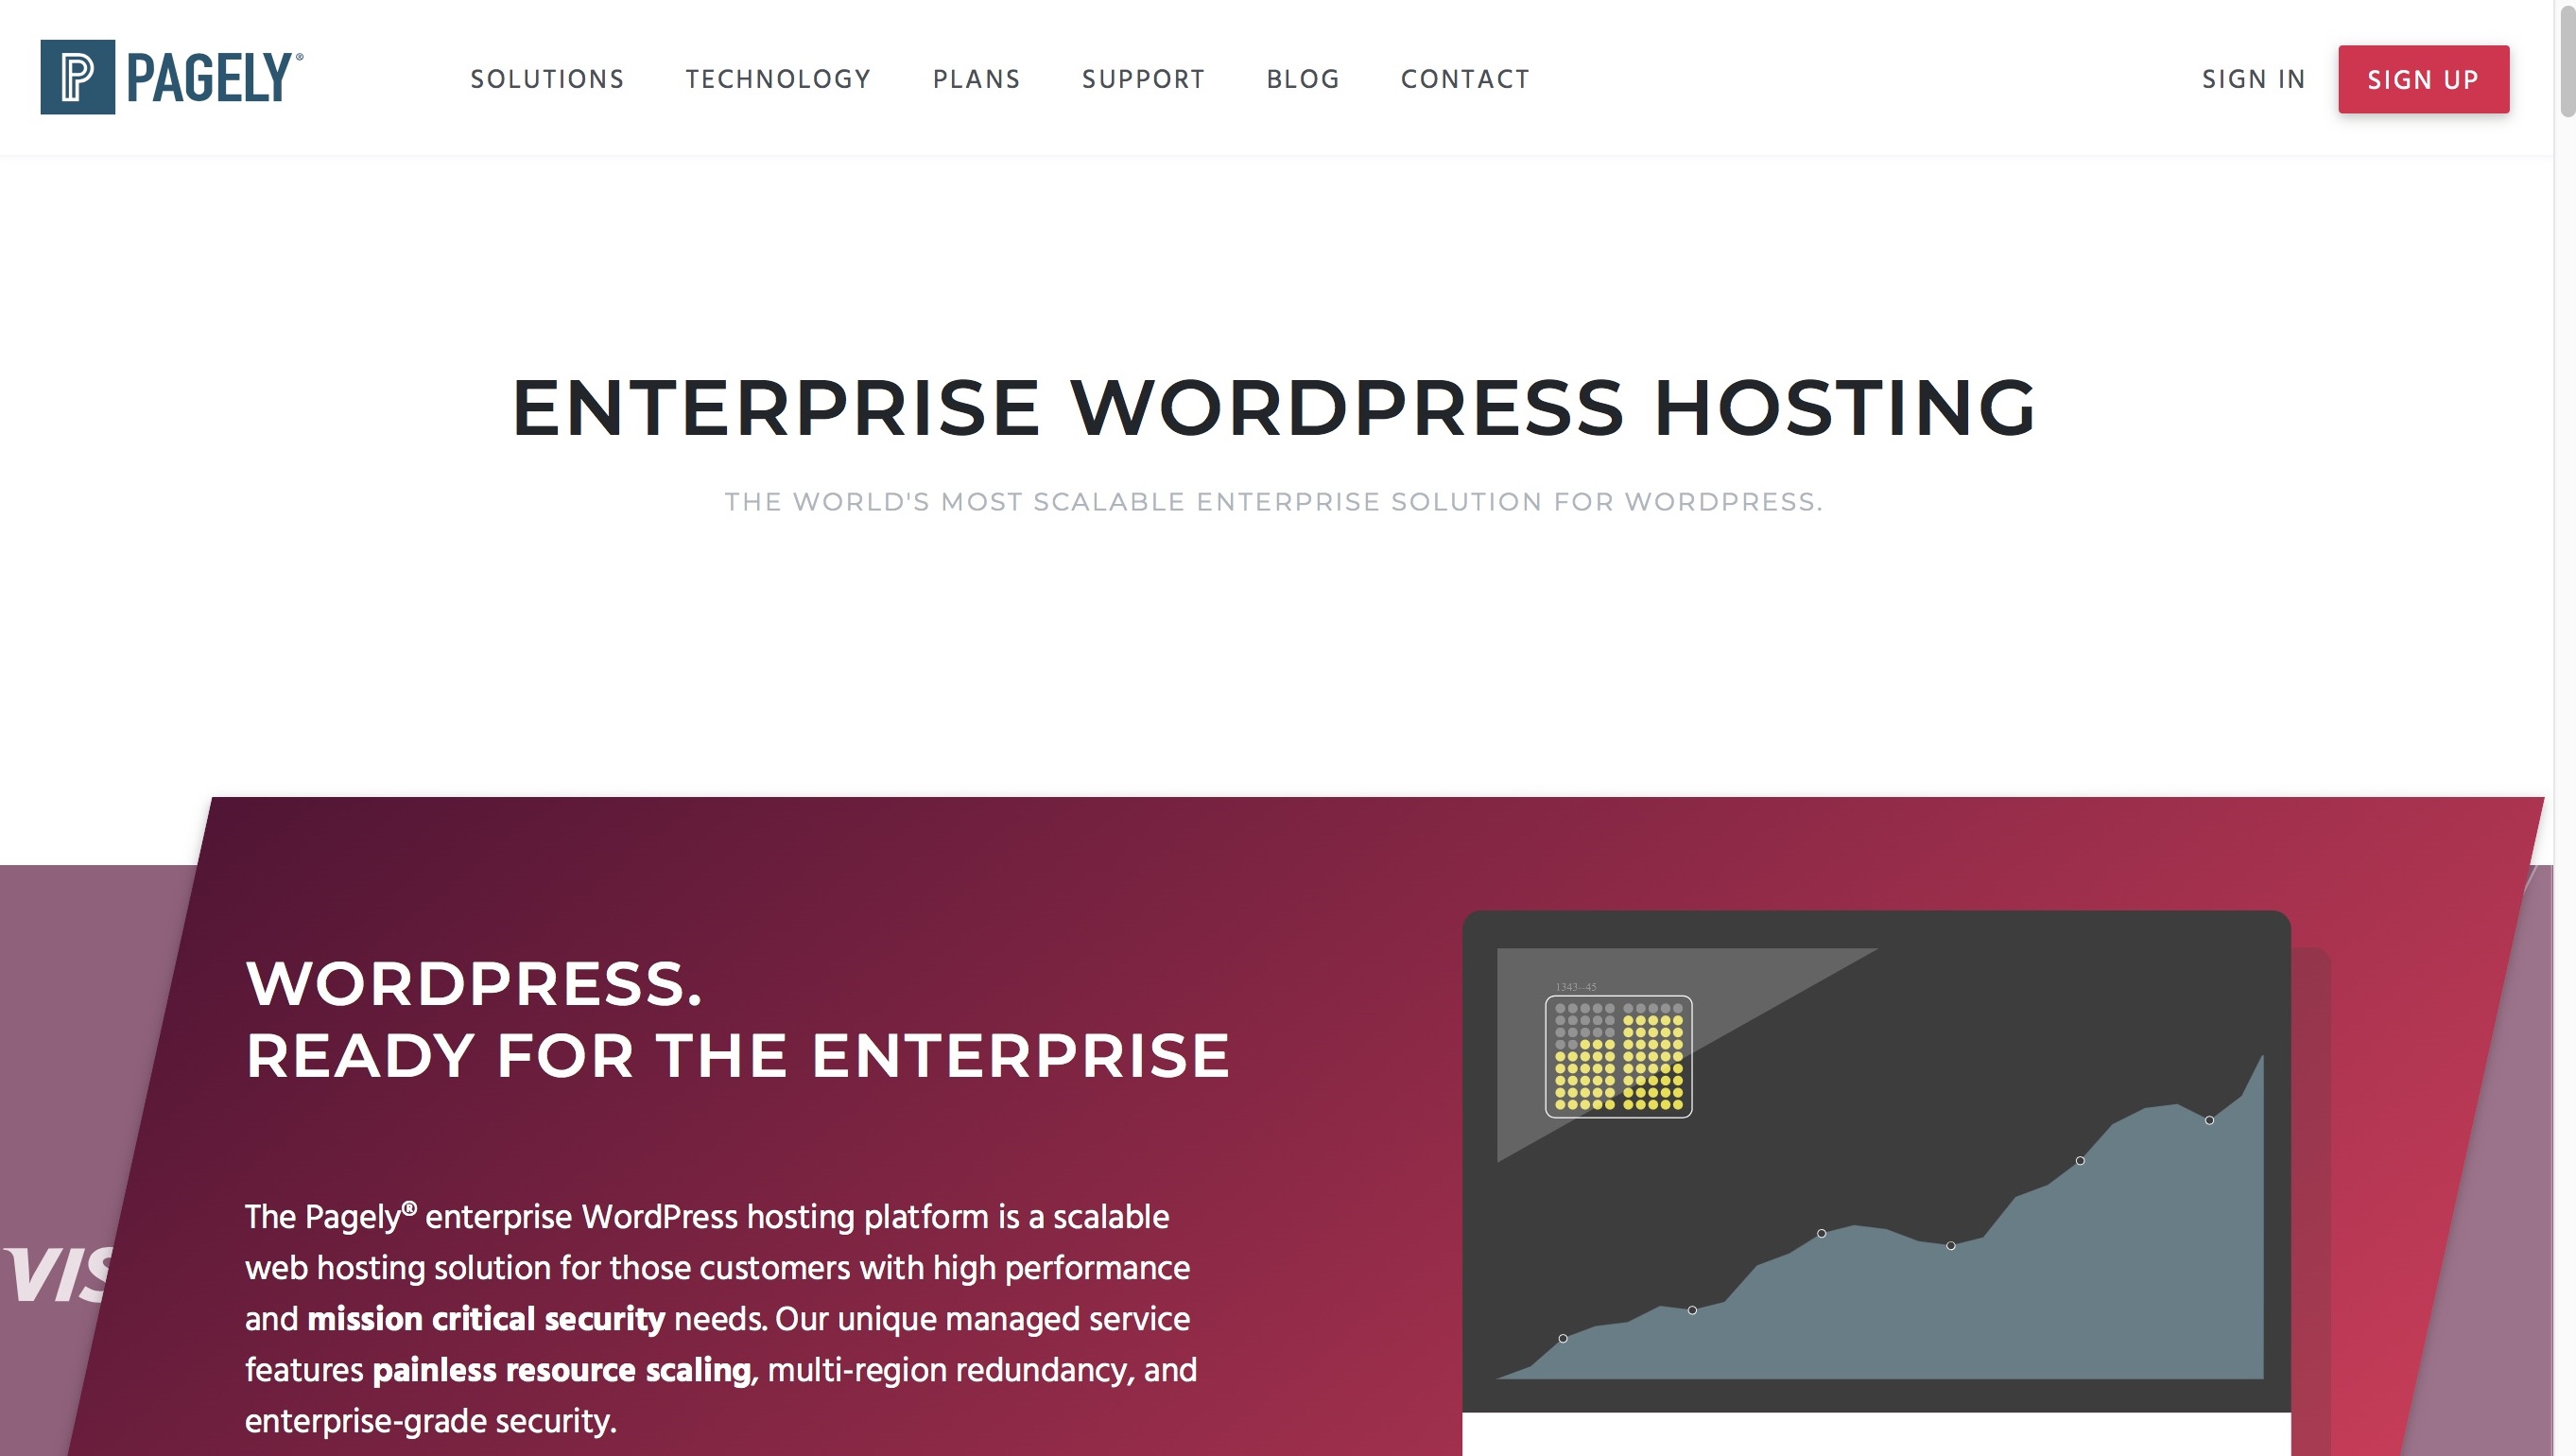 enterprise WordPress hosting by Pagely